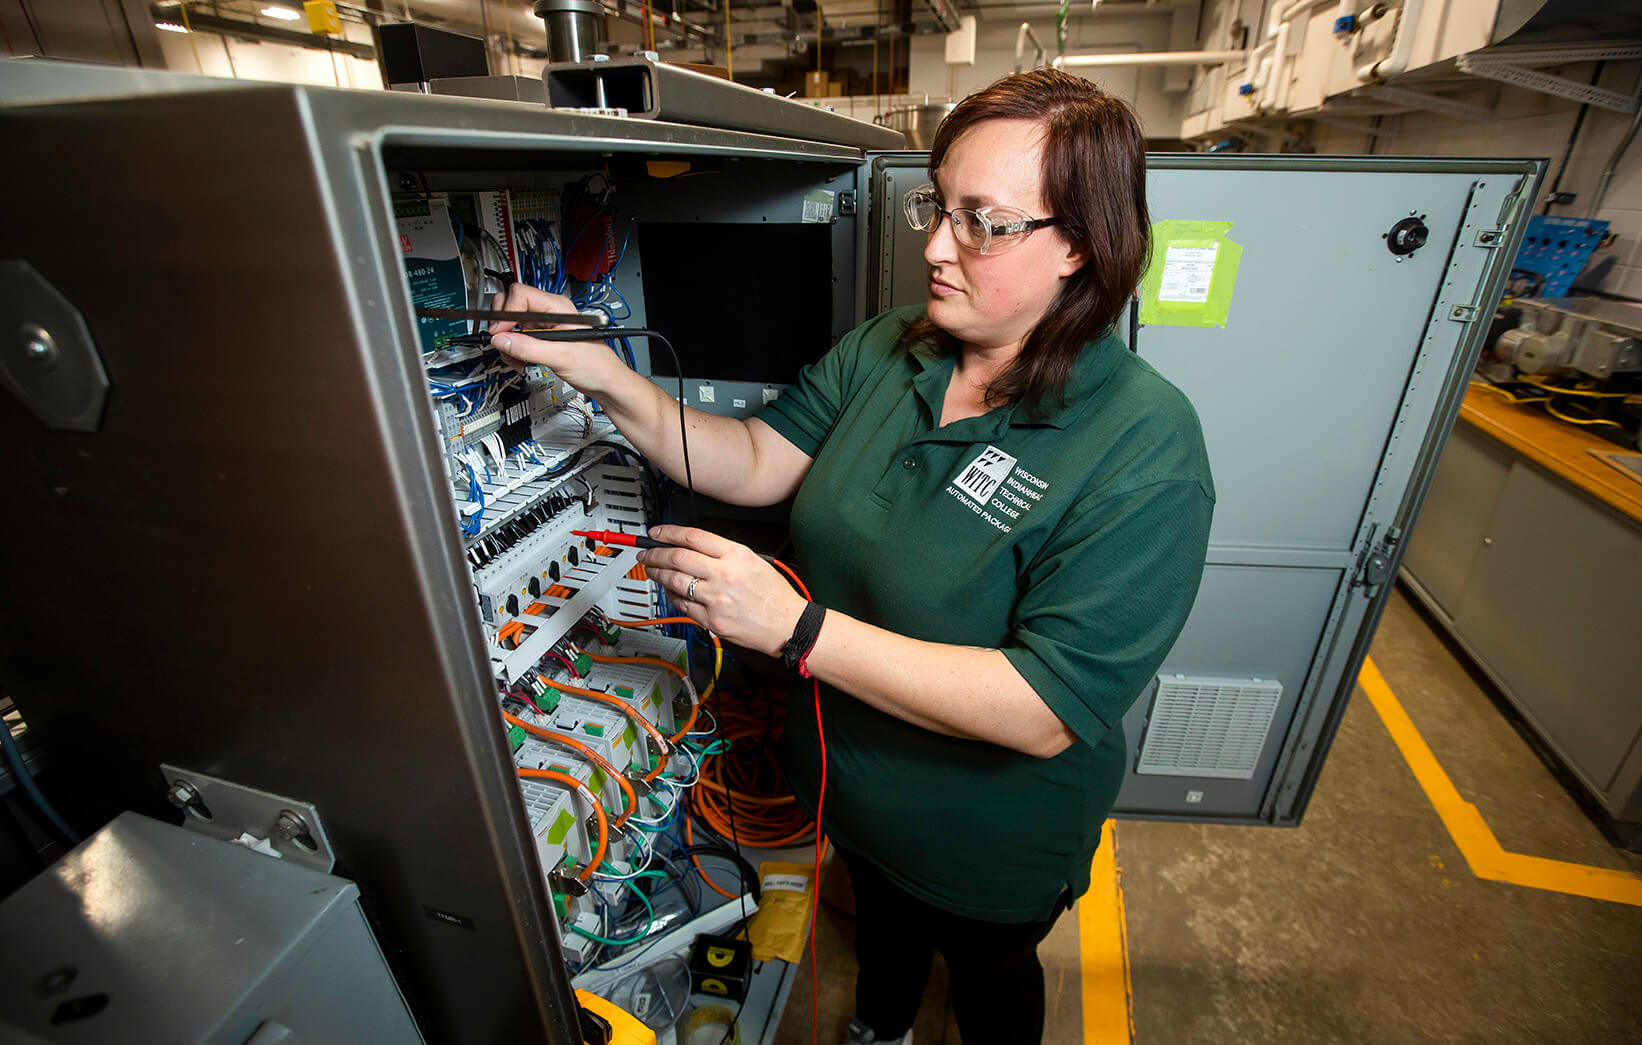 A female student doing hands-on work in the Automation for Industrial Systems program